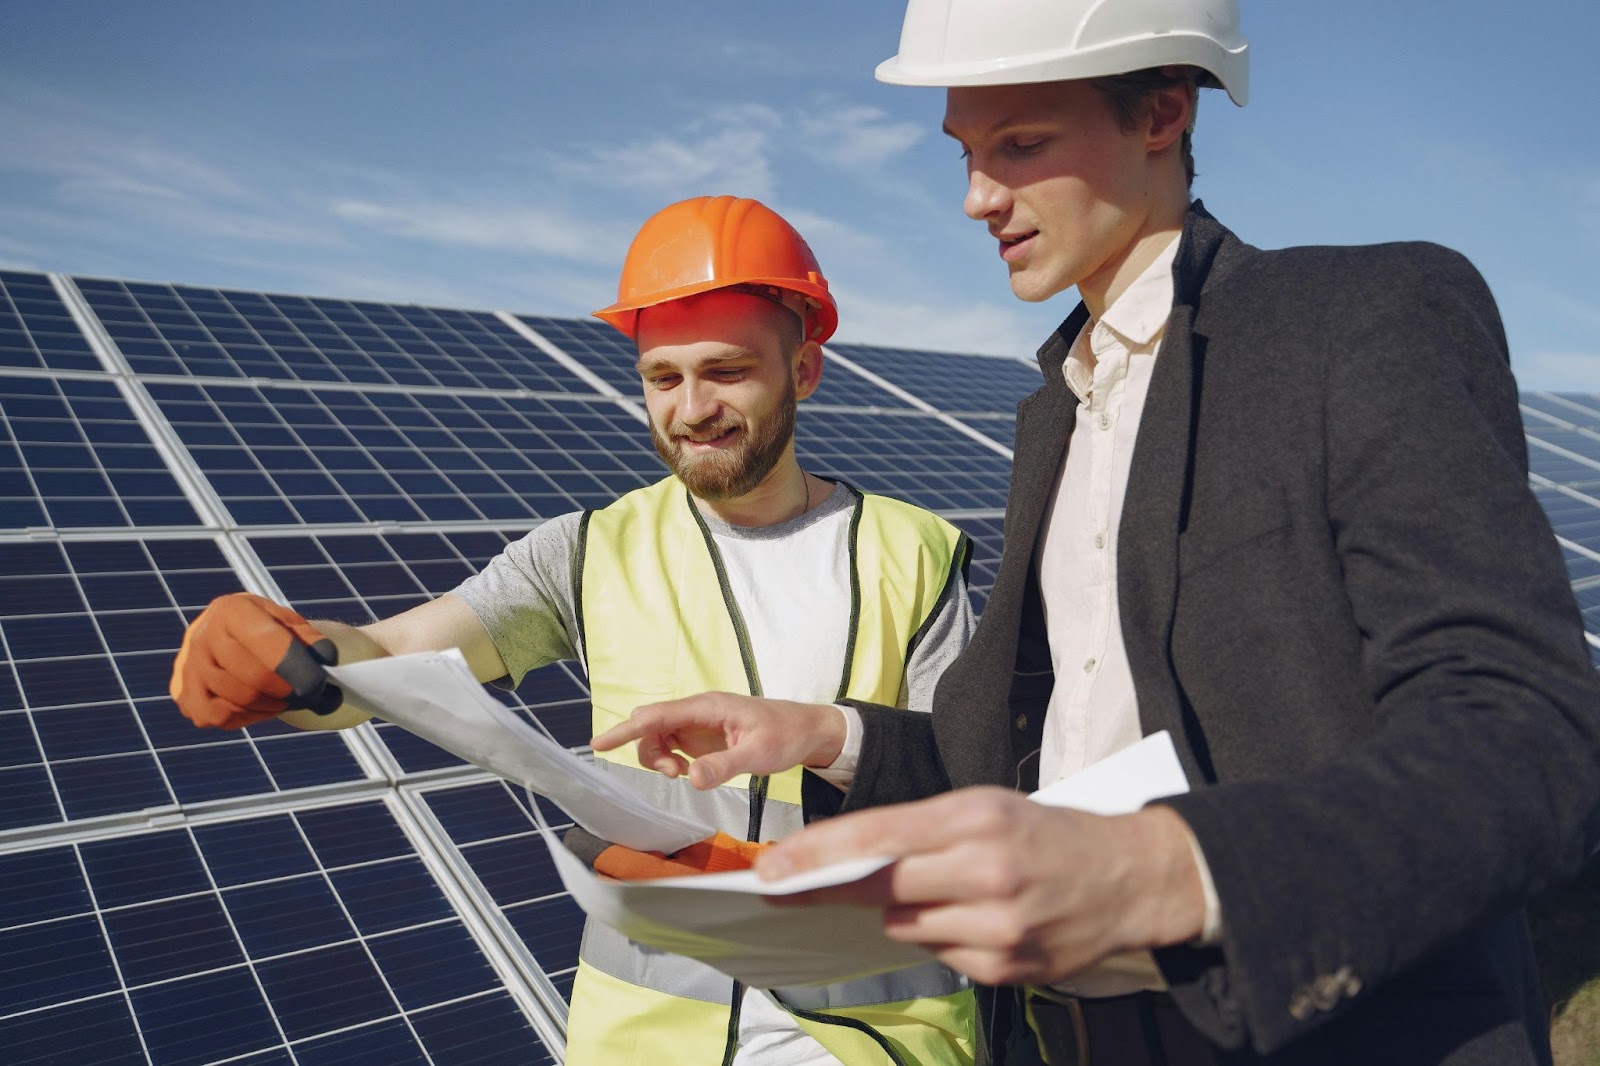 Two men next to a solar array wearing hard hats and looking at paperwork